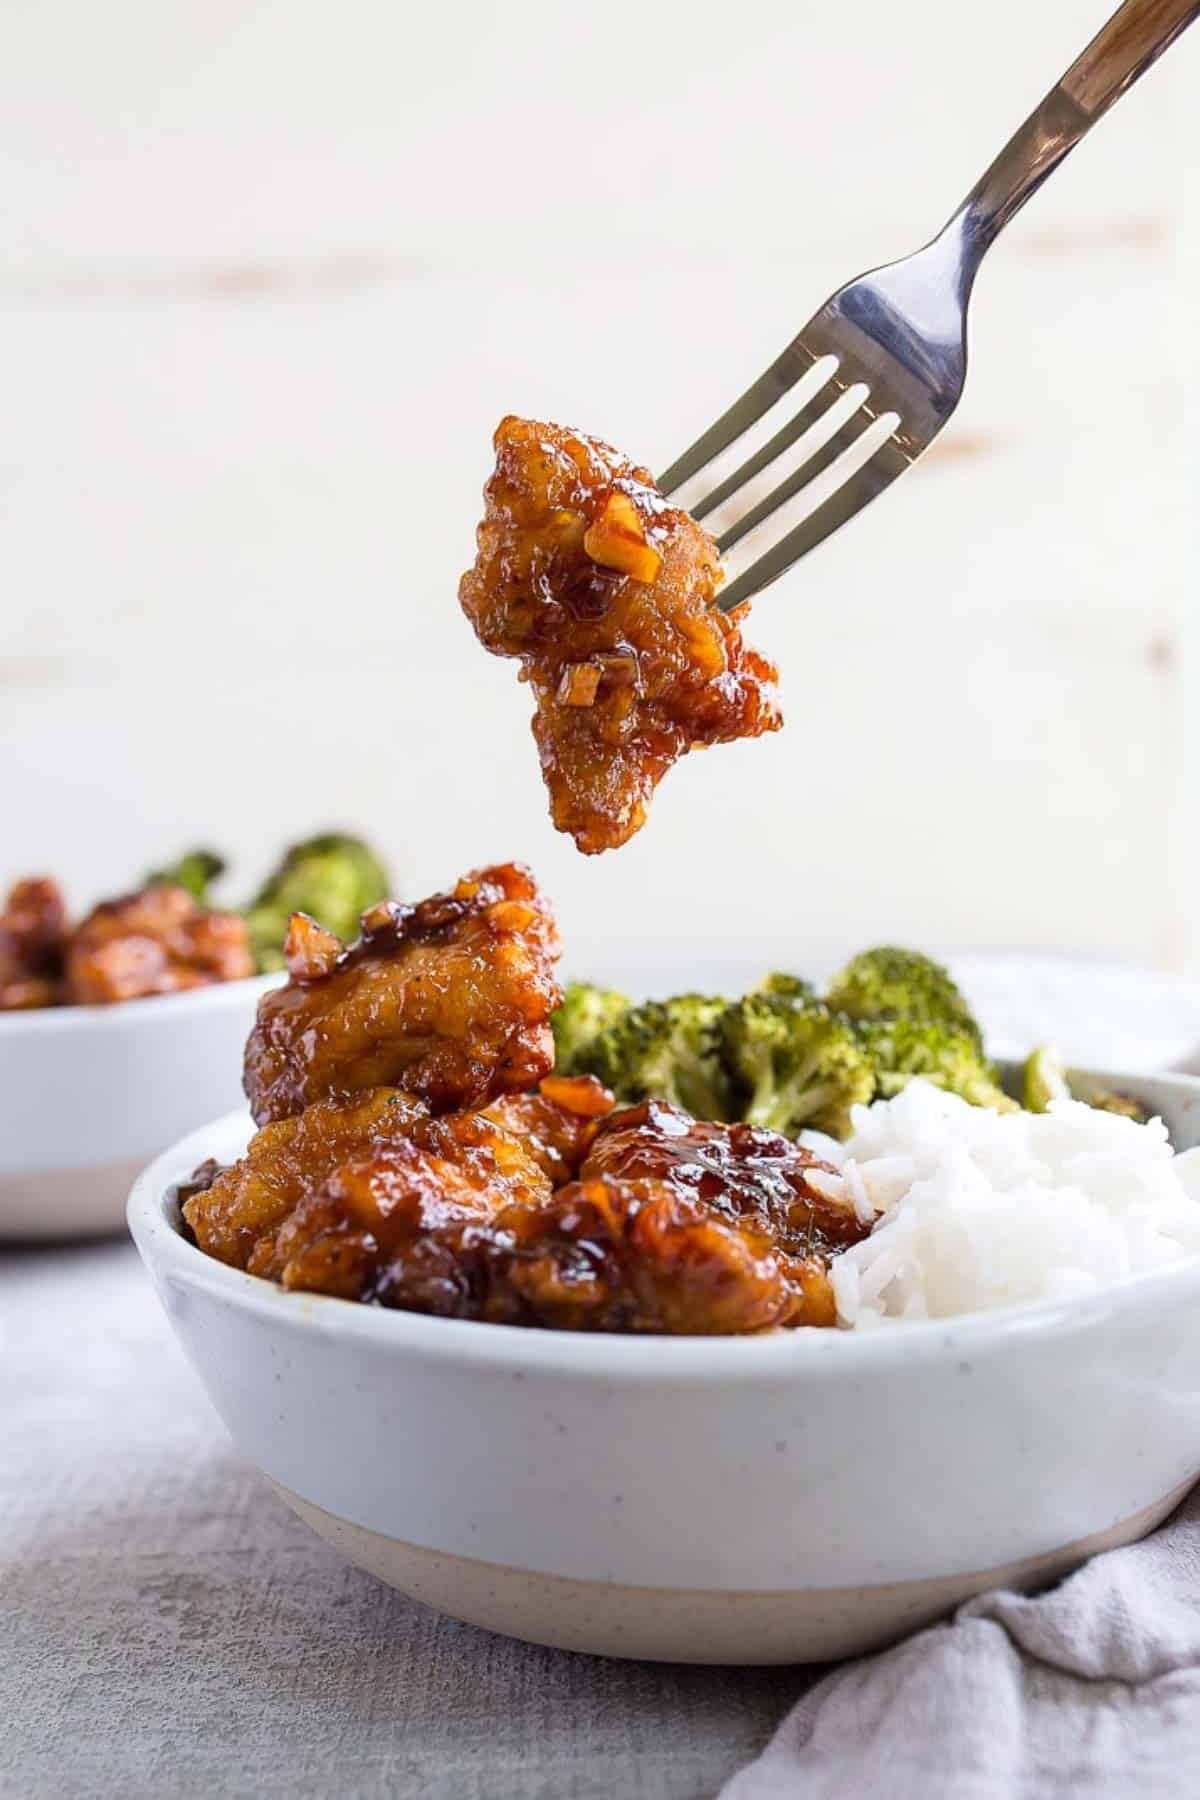 Fork removing a golden brown piece of food from a bowl with rice and broccoli.